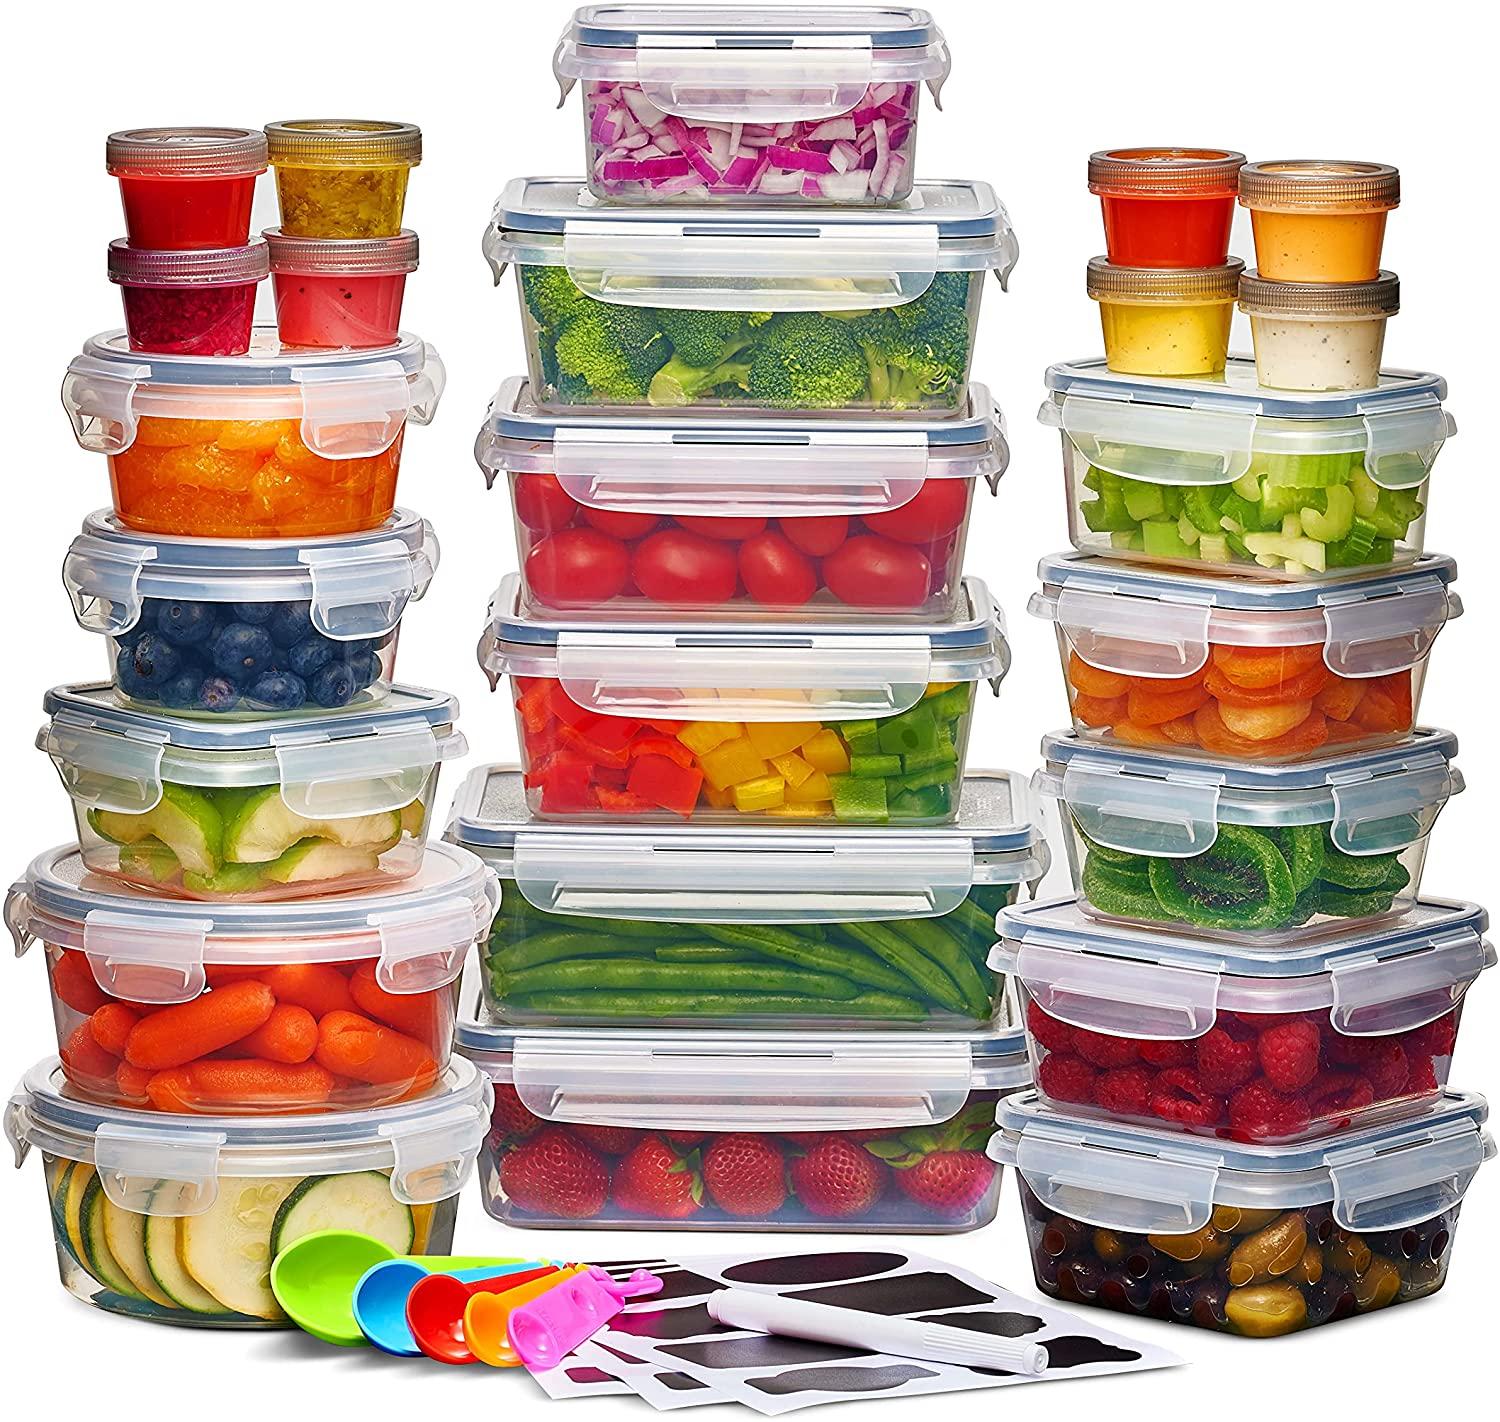 24-Piece Airtight Food Storage Container Set for $21.24